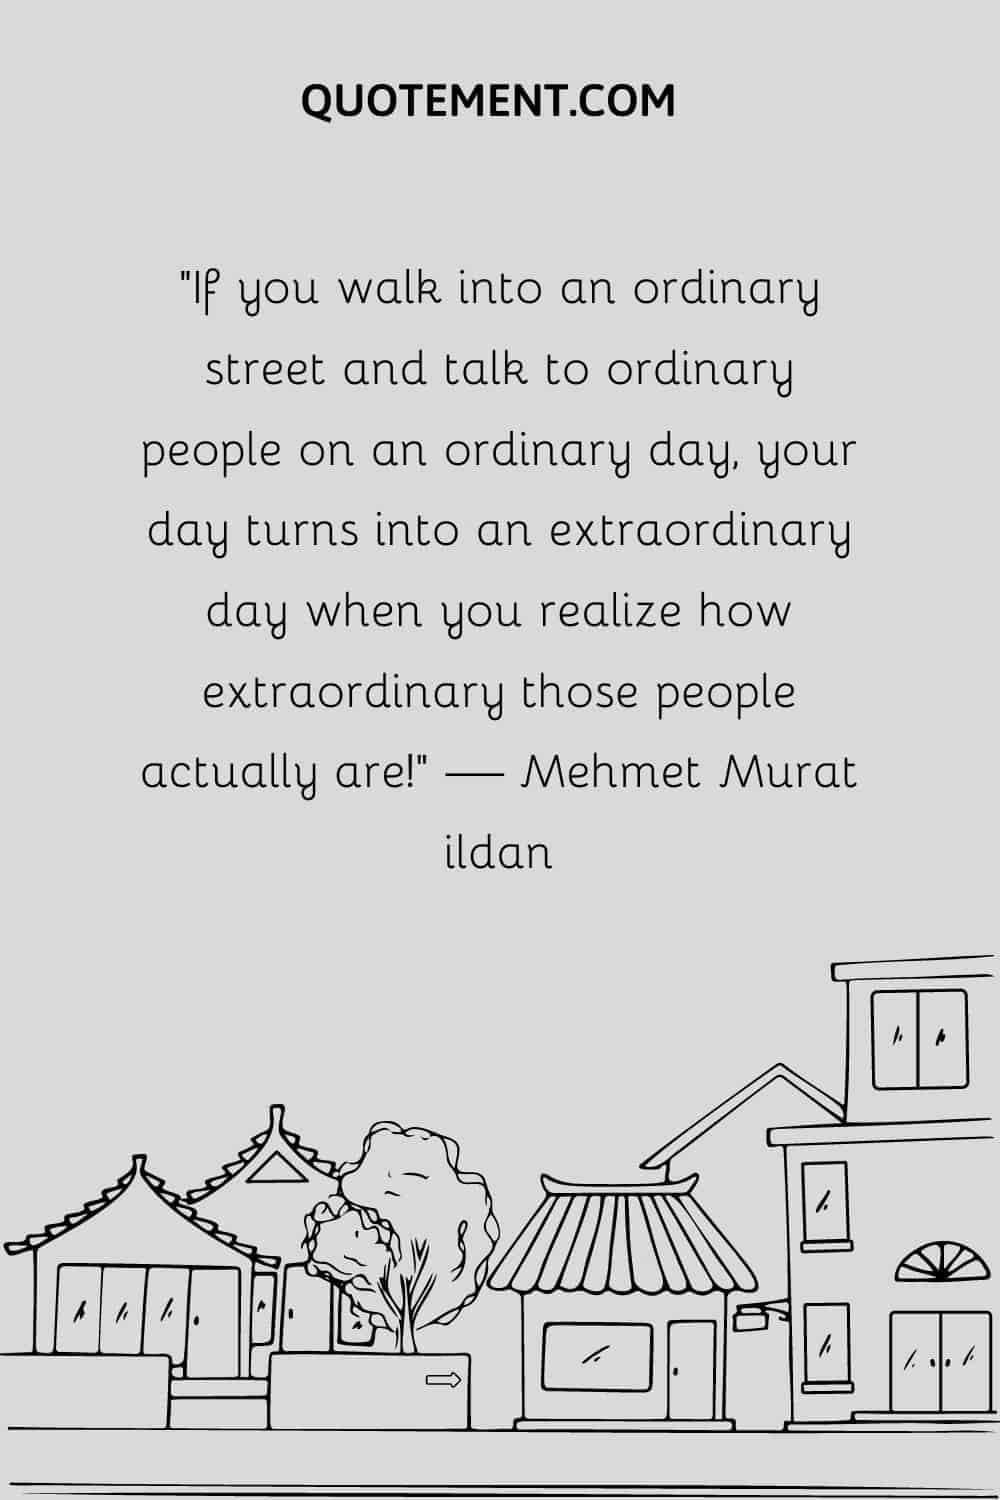 If you walk into an ordinary street and talk to ordinary people on an ordinary day, your day turns into an extraordinary day